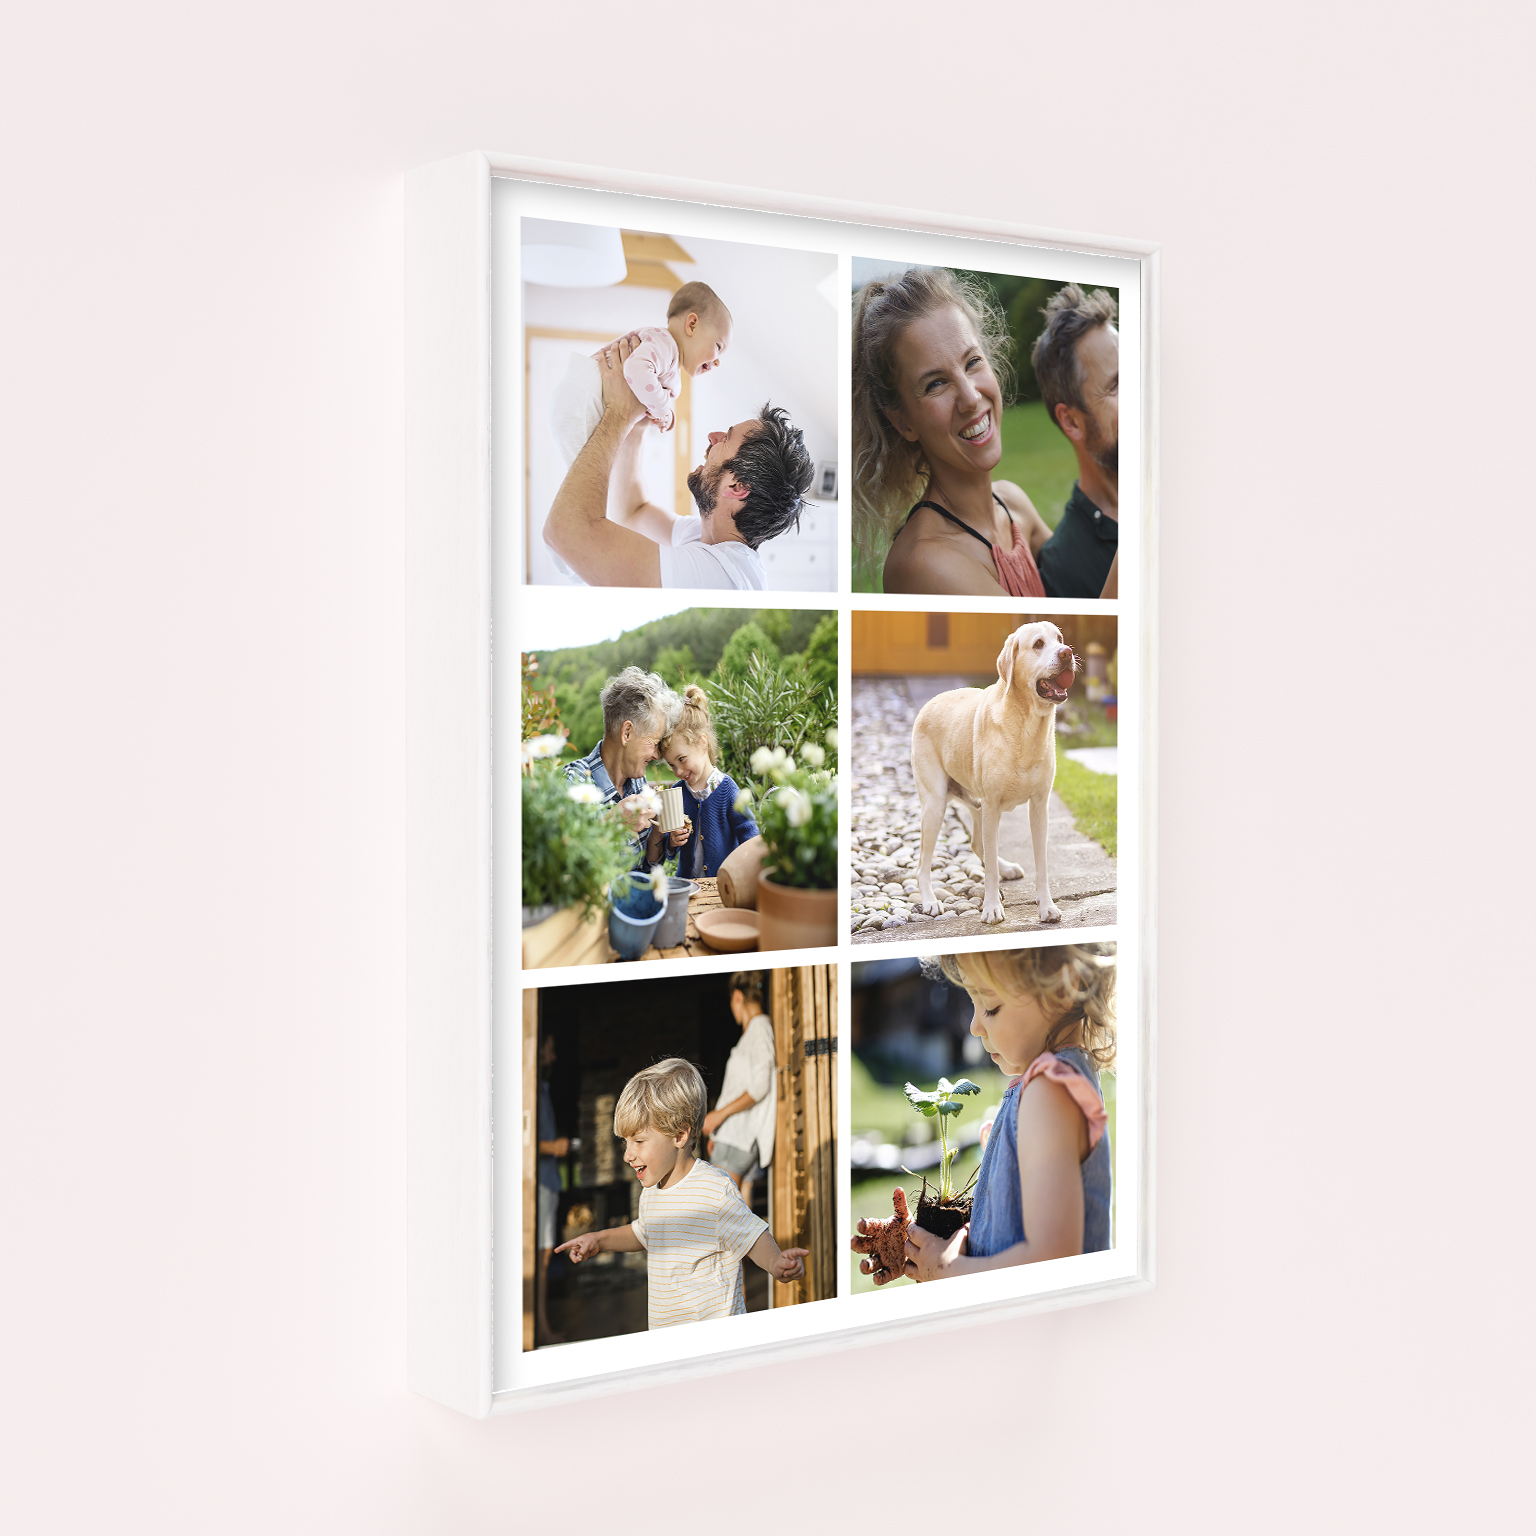 Wall Art Framed Prints - Friends Collage - Craft a personalised masterpiece showcasing 6 photos, capturing the essence of friendship.